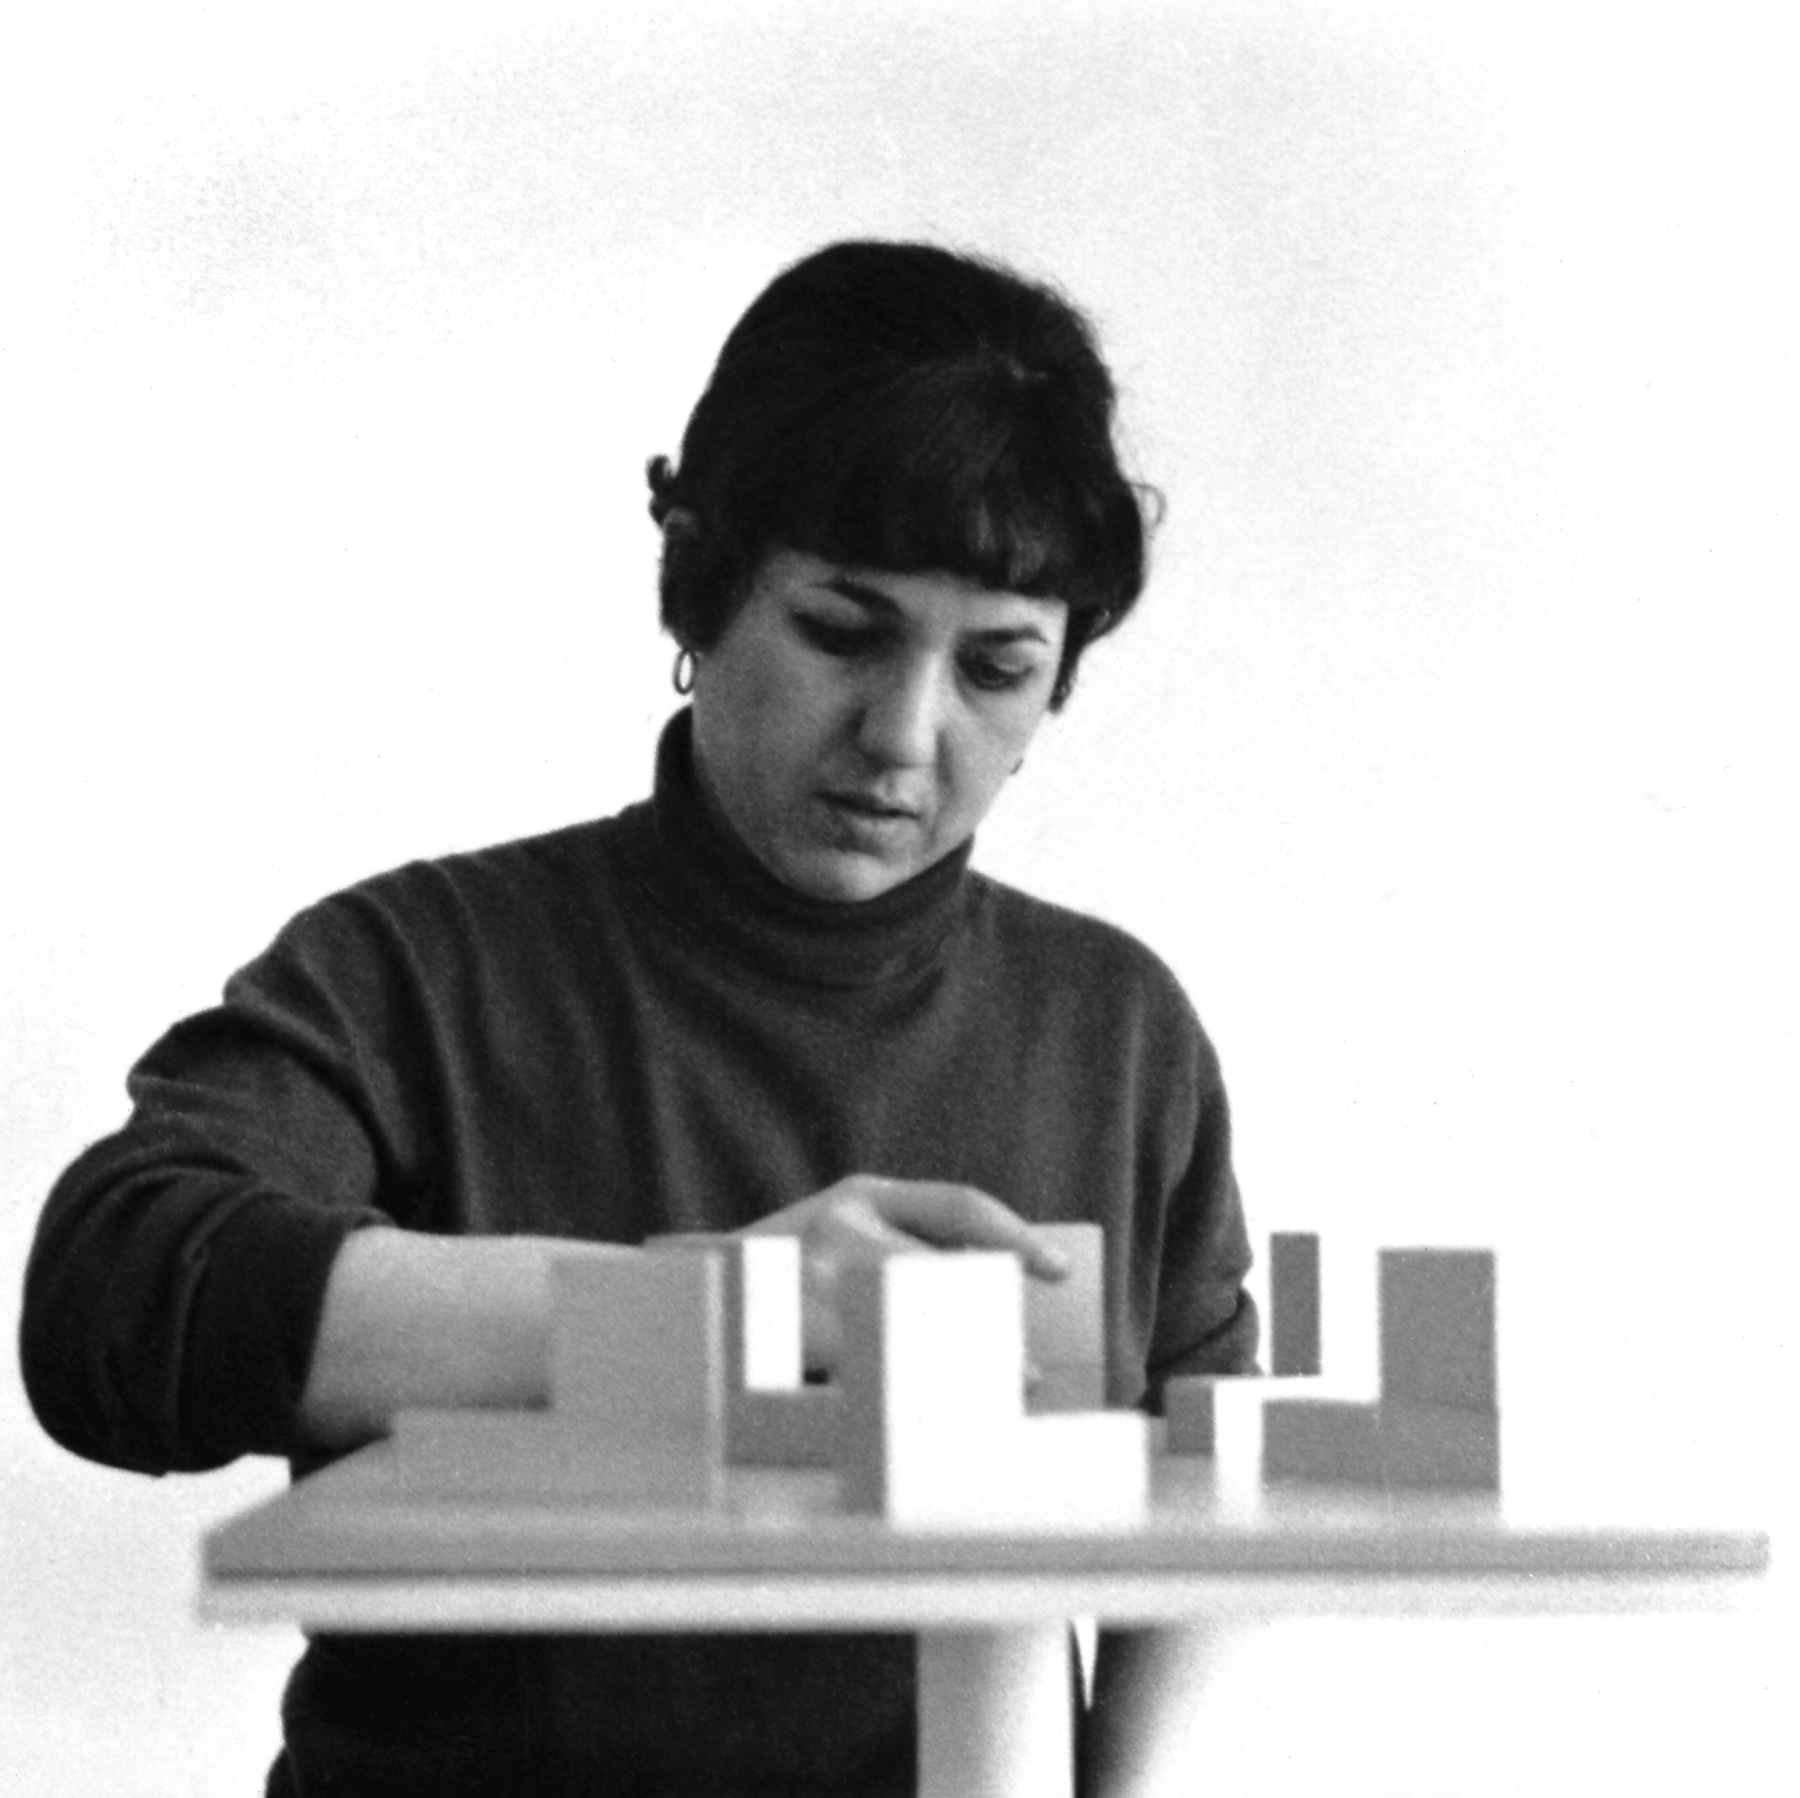 Judy Chicago with Aluminum Rearrangeable Game Board, c. 1965

&amp;copy;&amp;nbsp;Judy Chicago / Artists Rights Society (ARS), New York

Photo courtesy of Through the Flower Archives